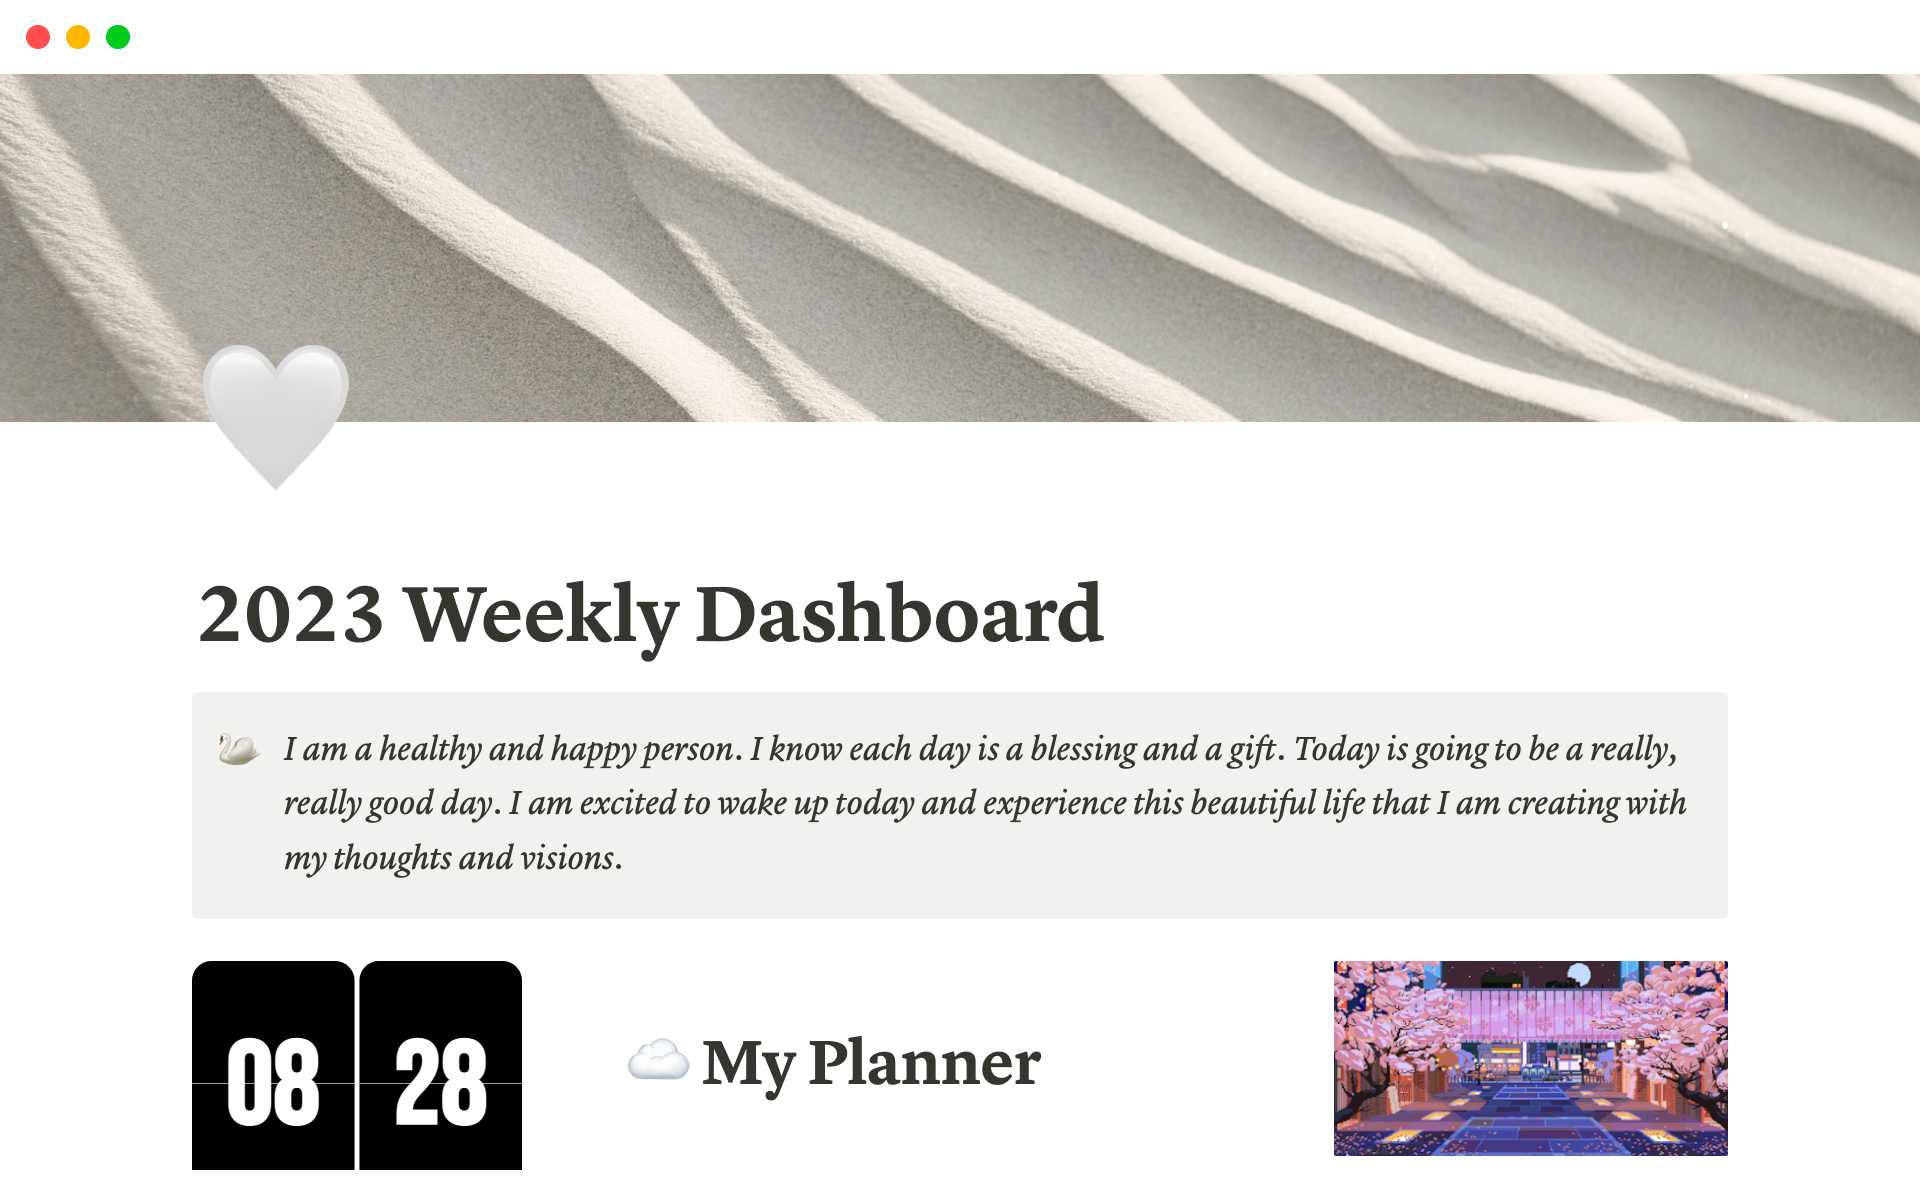 Oranize your life, goals, and workspace by planning with this 2023 Dashboard Template.